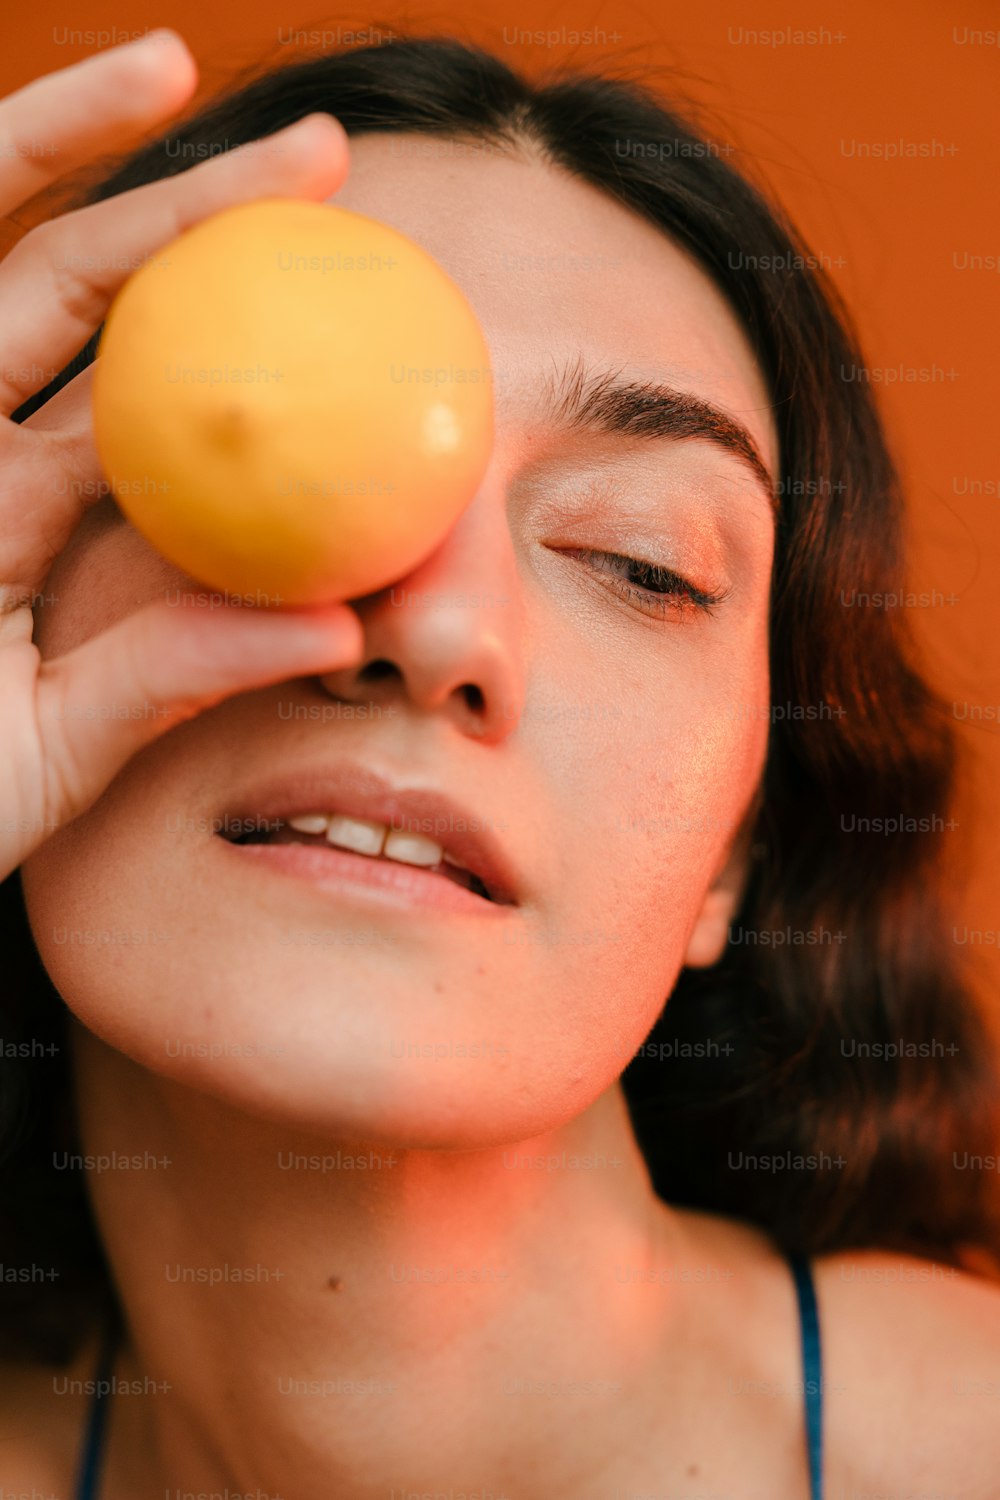 a woman holding an orange up to her eye